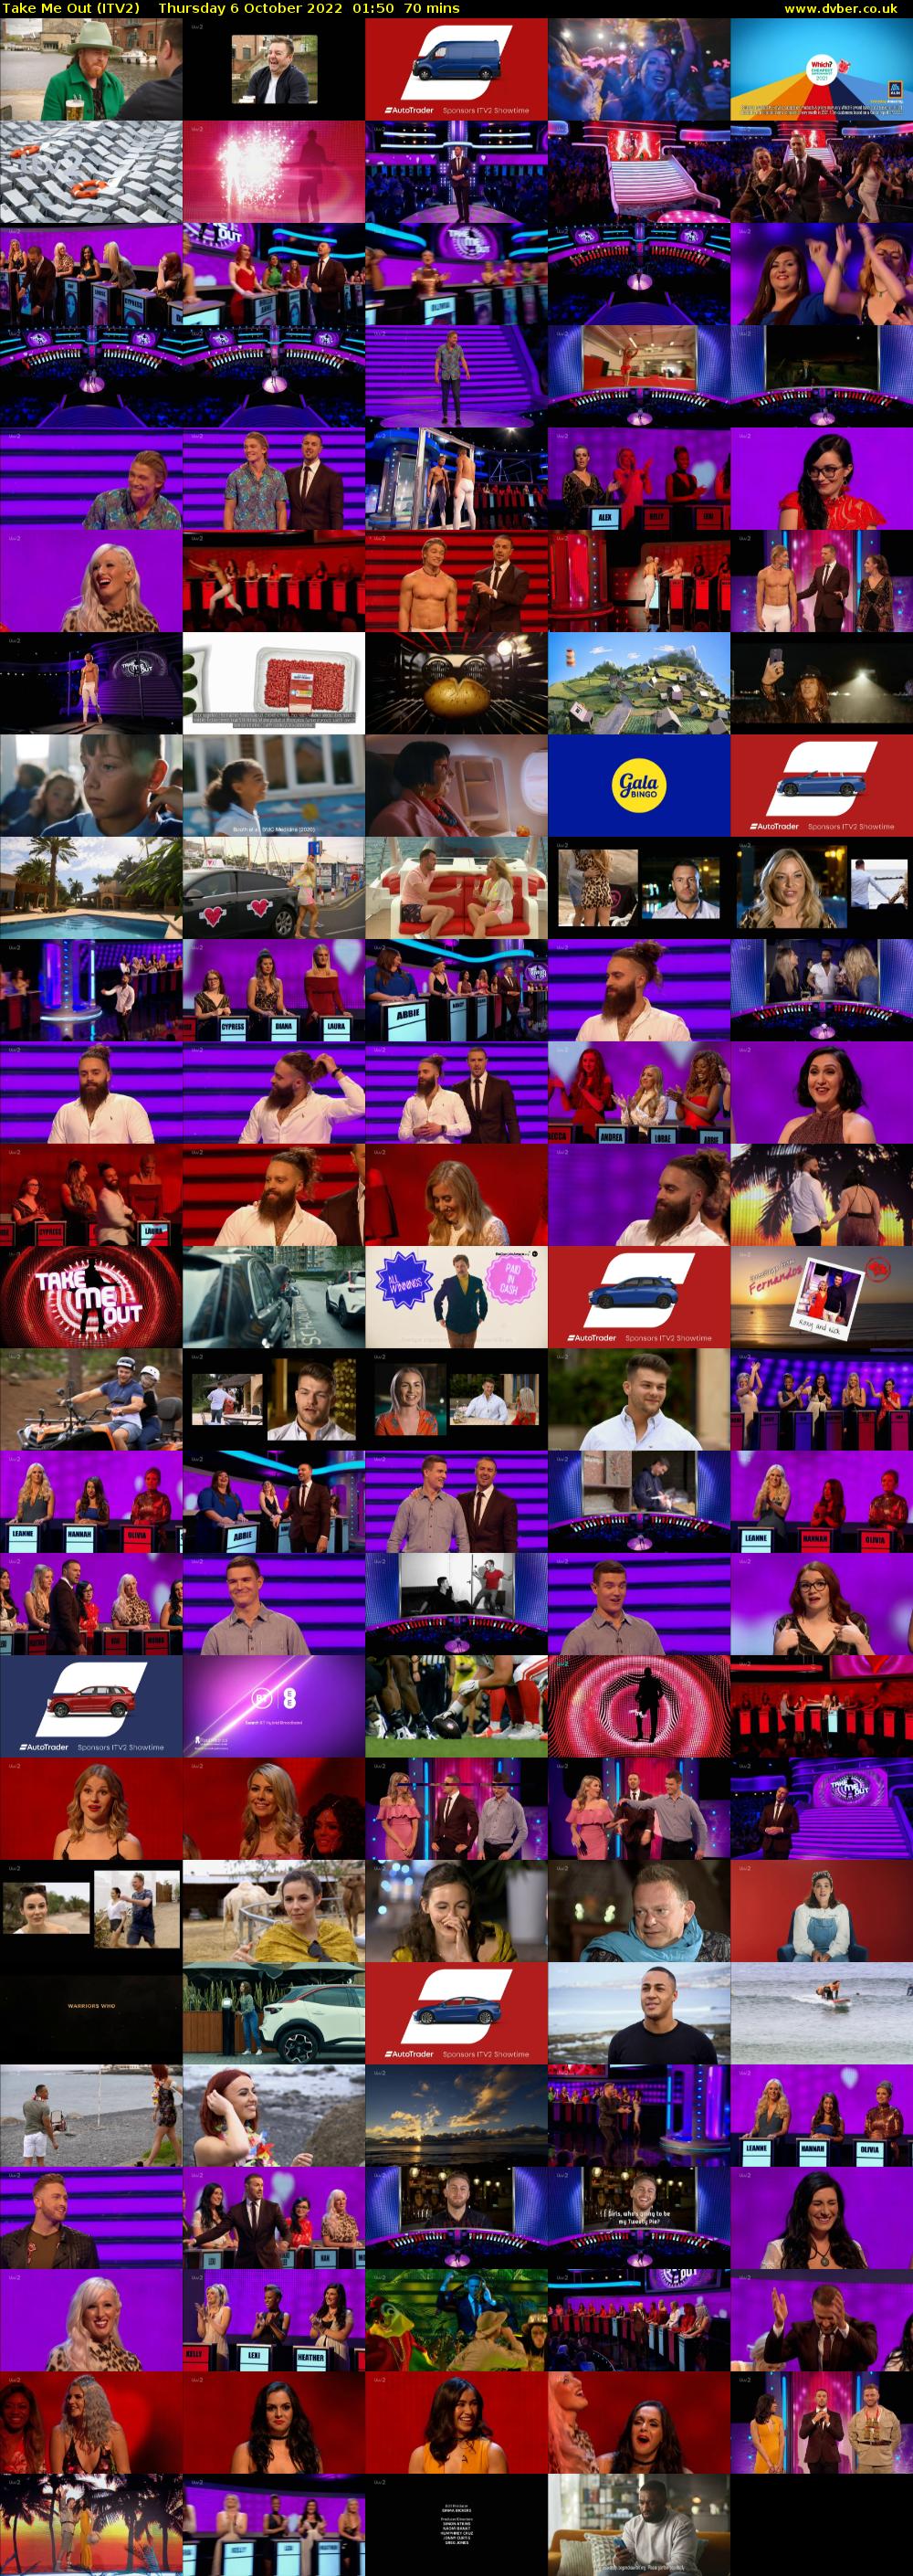 Take Me Out (ITV2) Thursday 6 October 2022 01:50 - 03:00